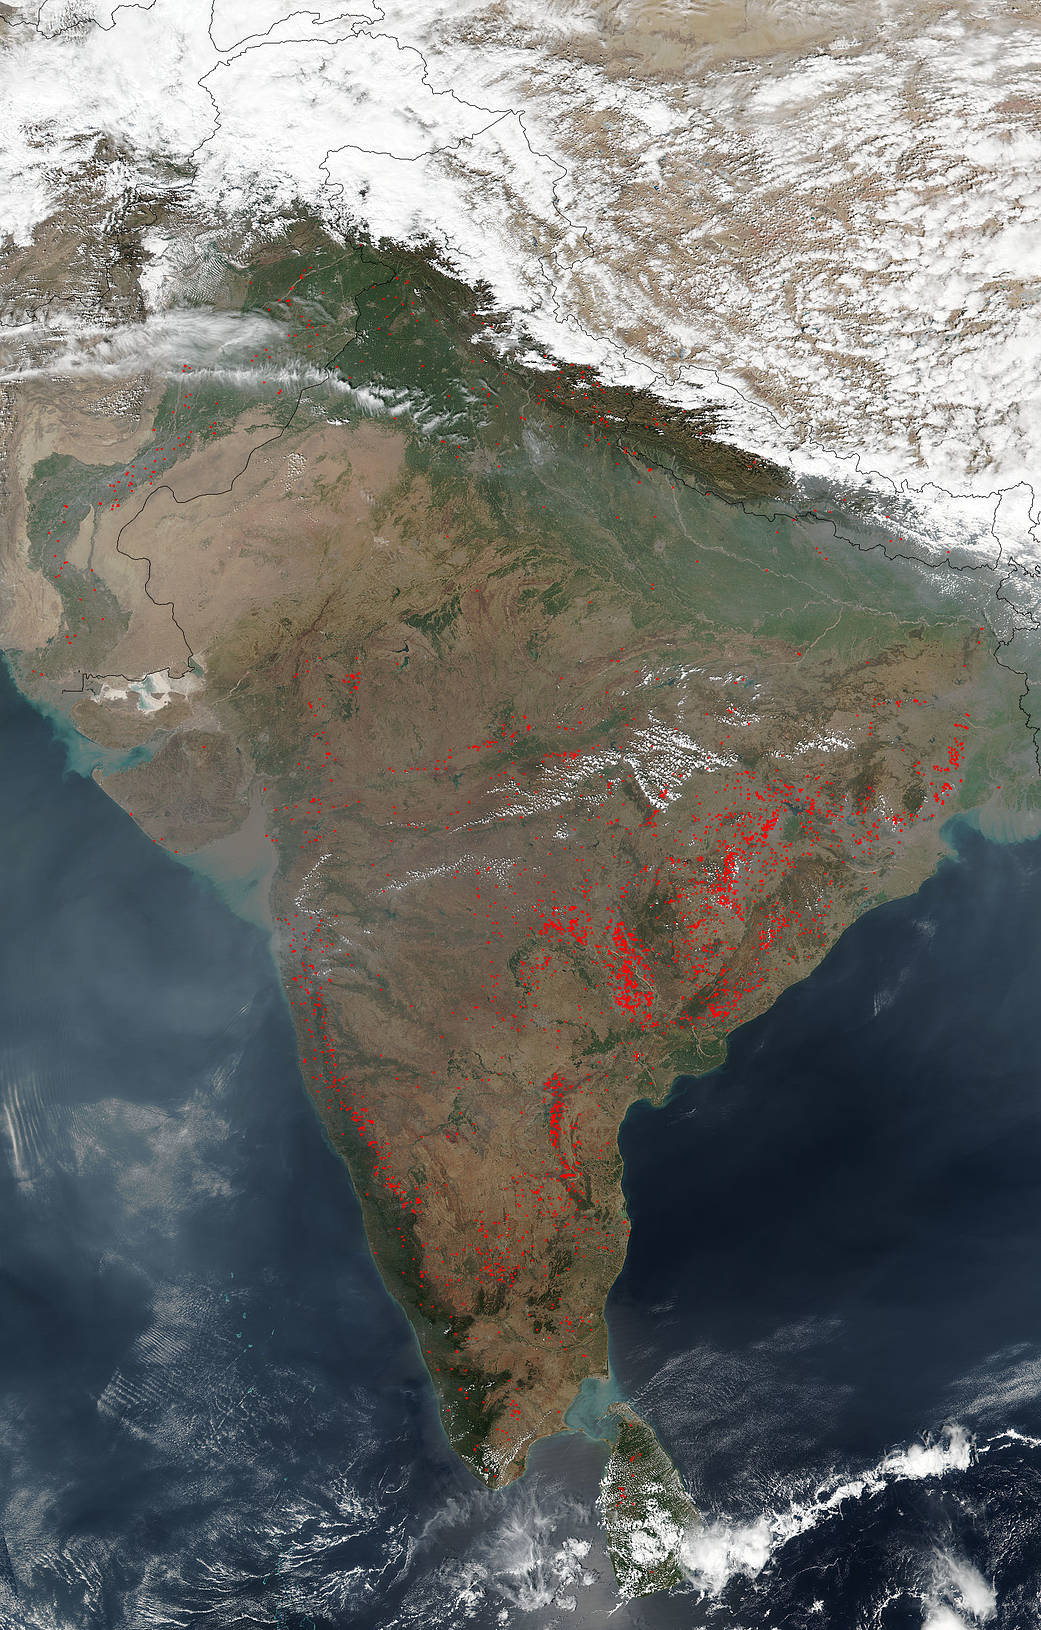 Fires in Southern India